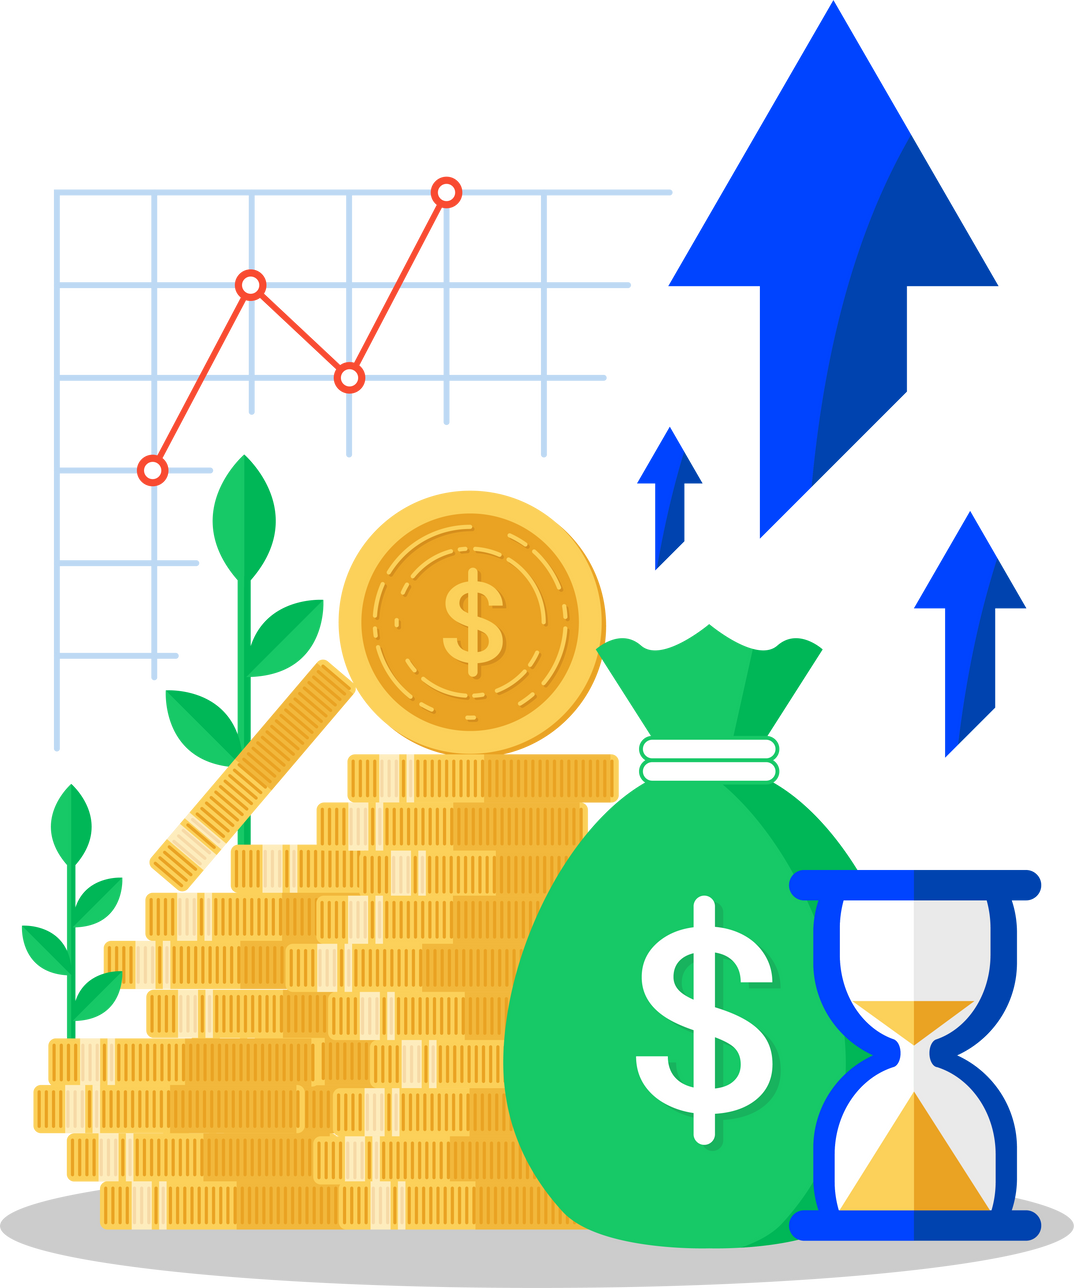 Mutual fund, Income increase, financial strategy performance, interest rate, high return on investment, budget balance, revenue growth, credit money, flat icon, Vector illustration